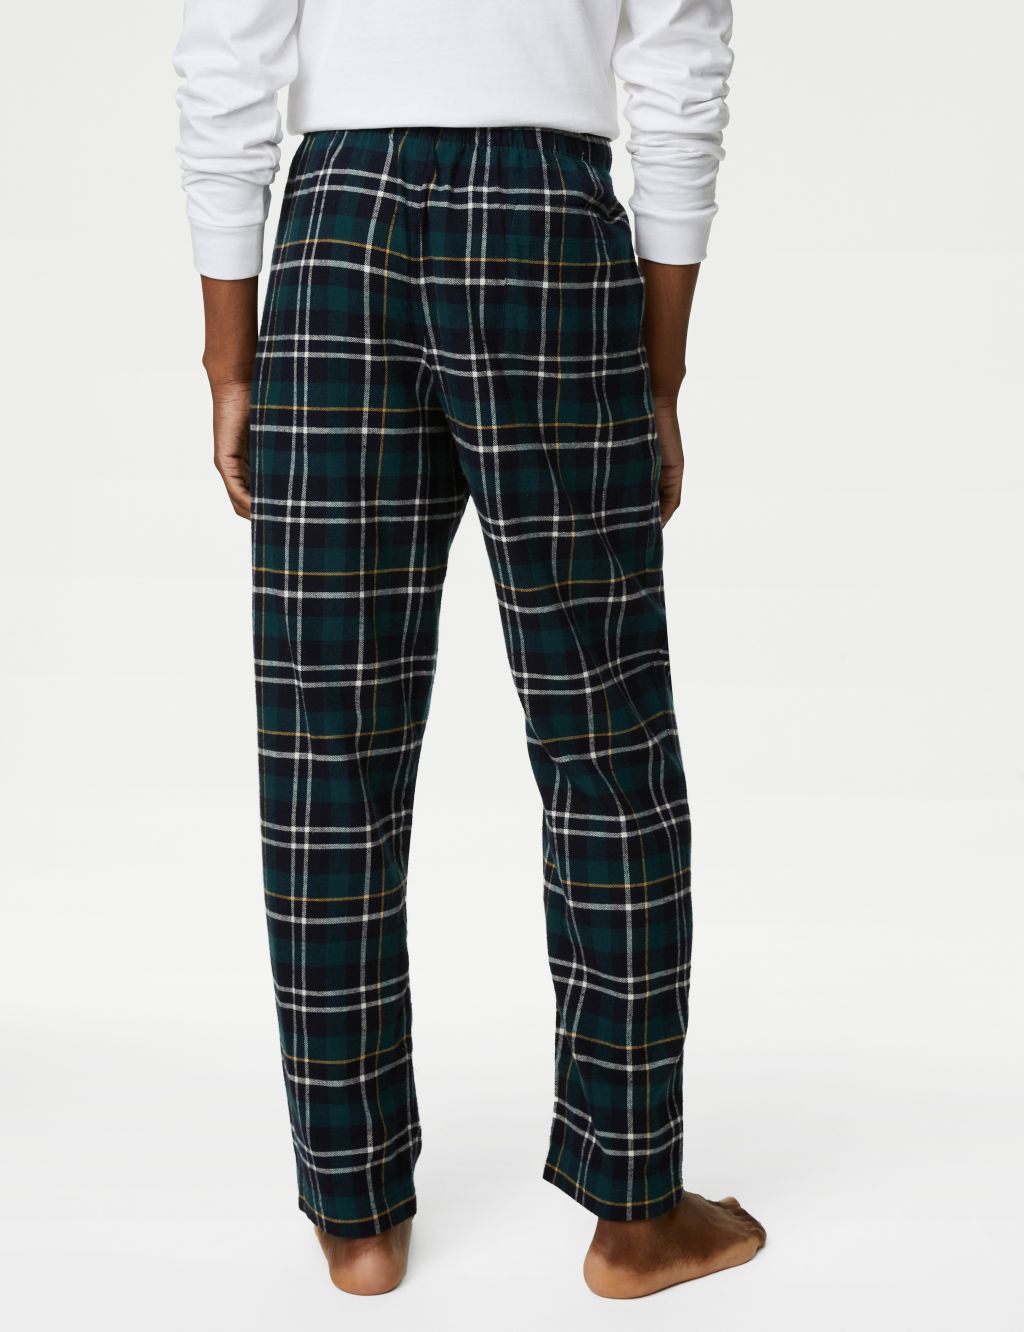 Brushed Cotton Checked Loungewear Bottoms image 5